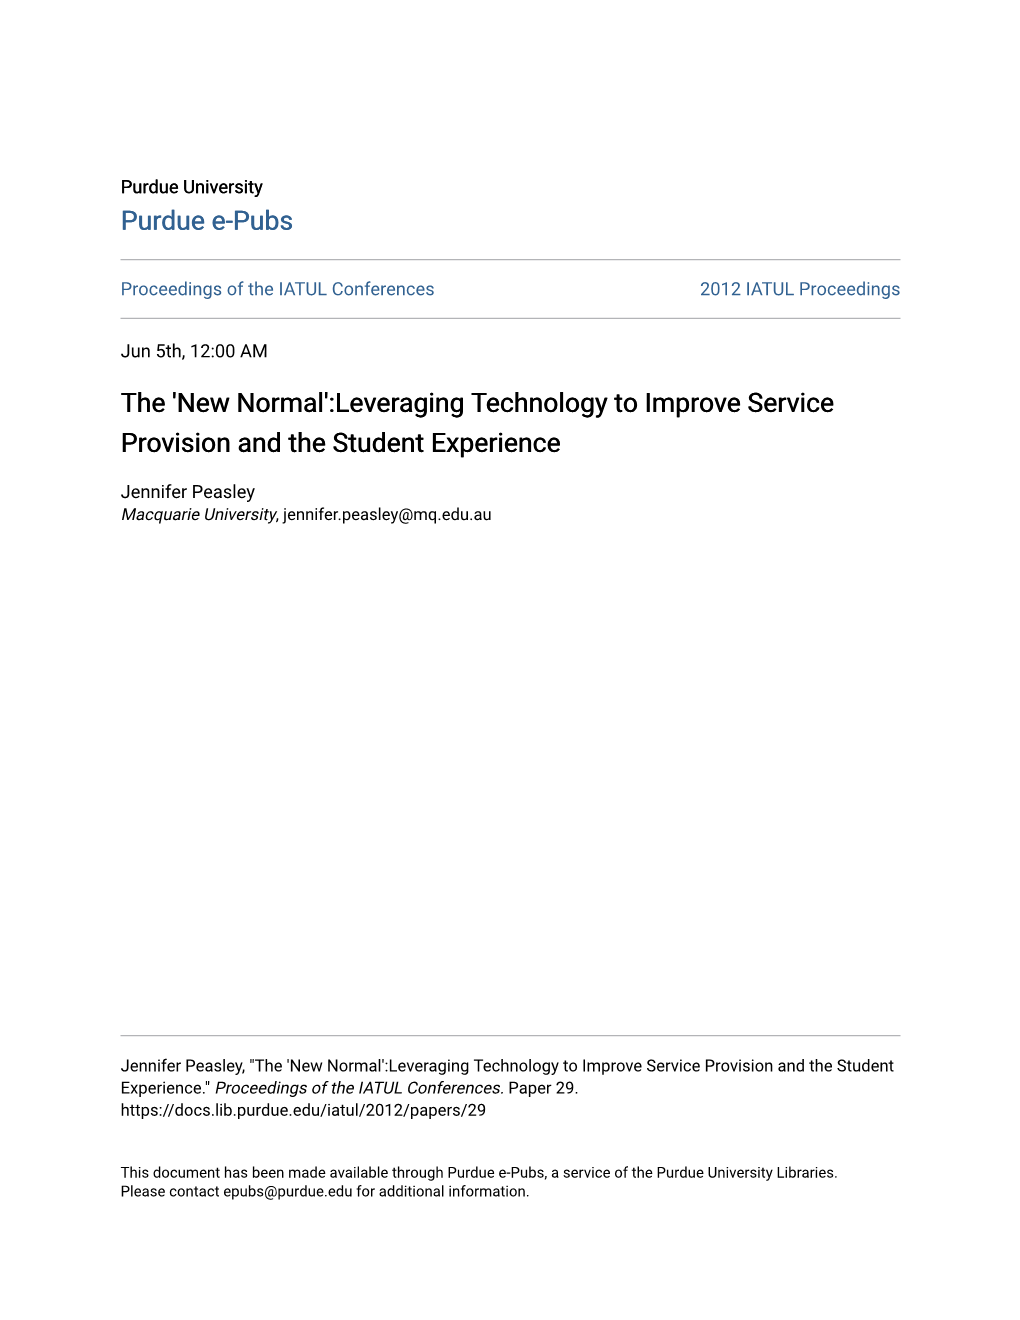 'New Normal':Leveraging Technology to Improve Service Provision and the Student Experience